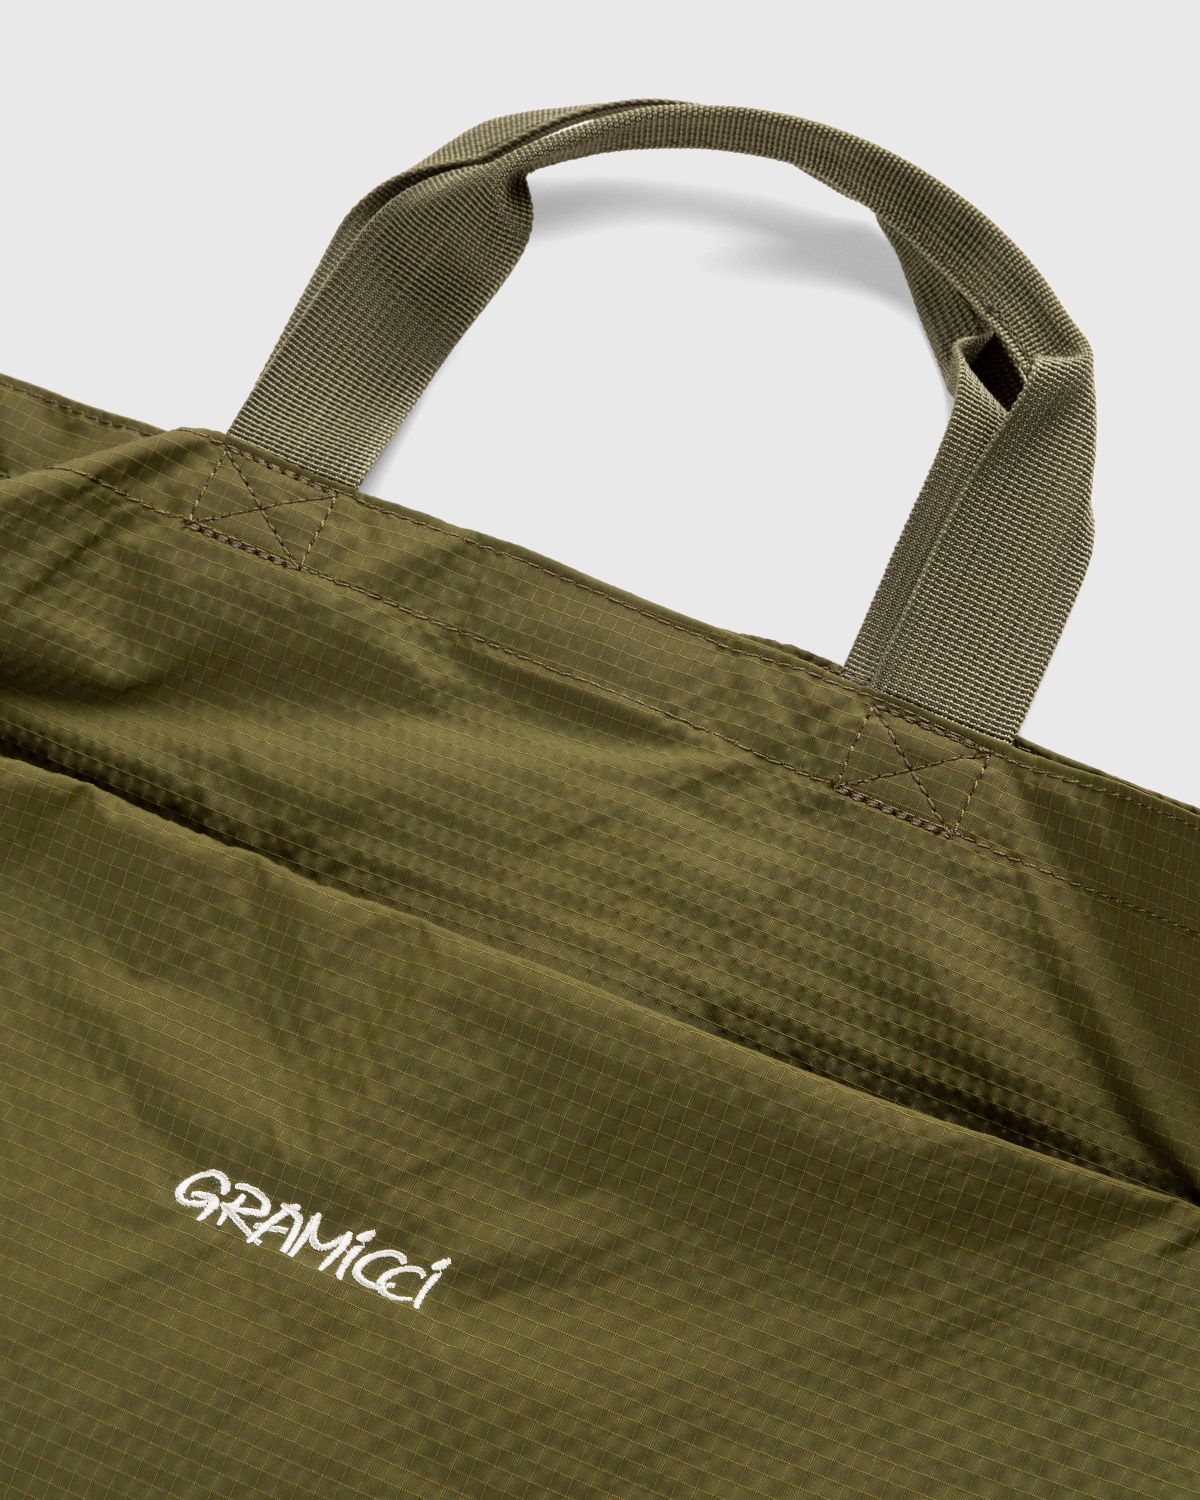 Gramicci – Utility Ripstop Tote Bag Army Green - Bags - Green - Image 5